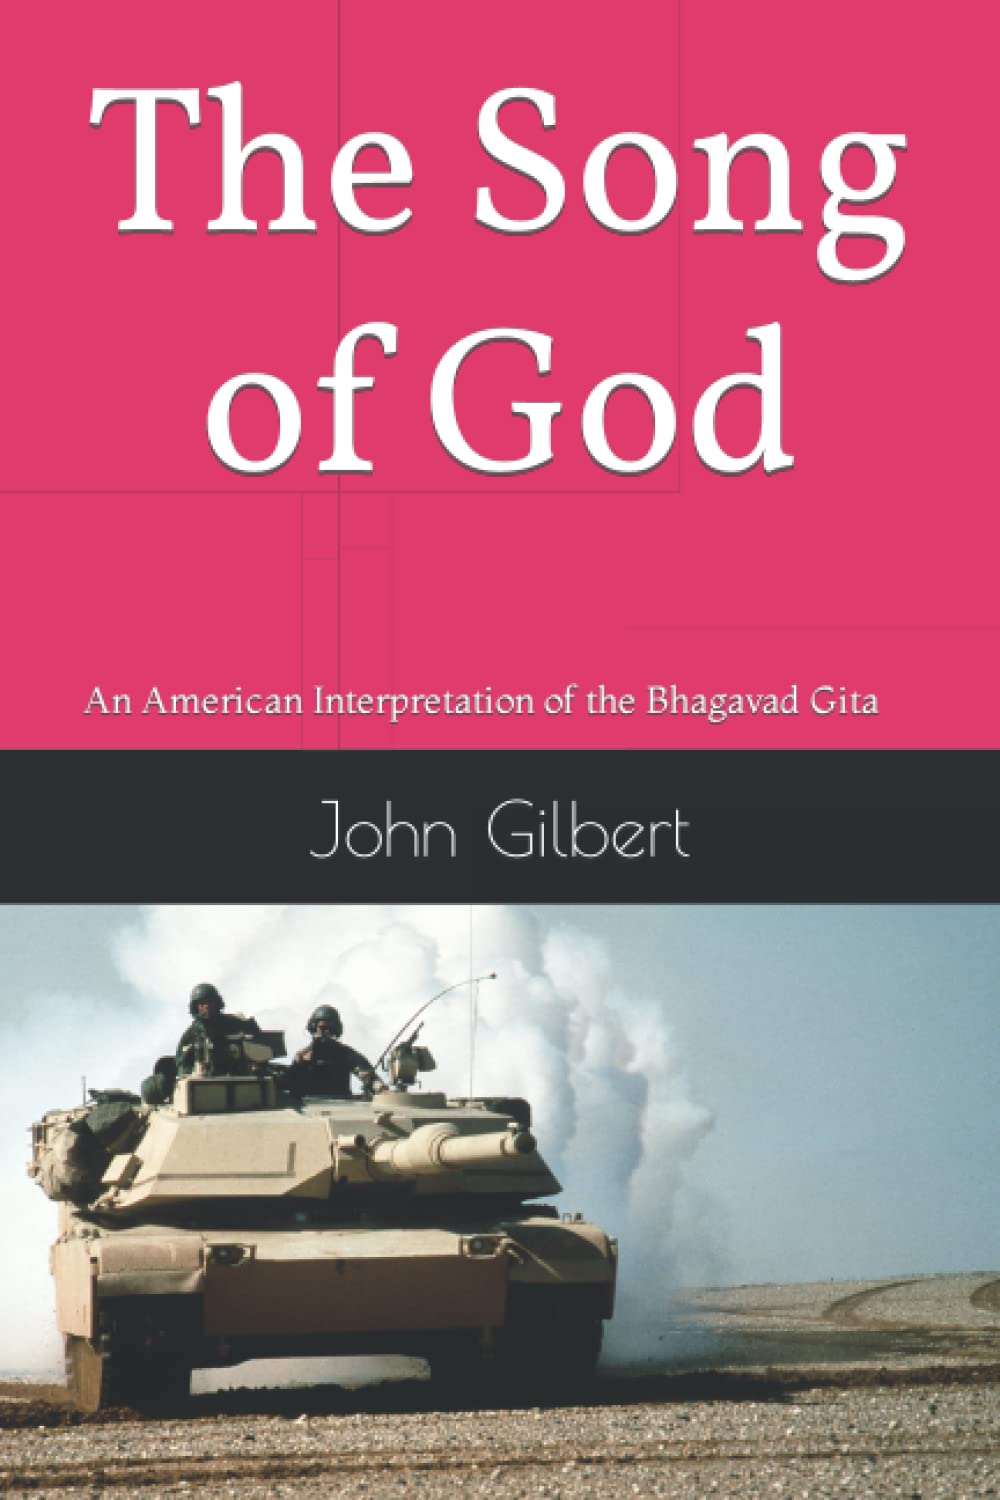 Book Review: The Song of God by John Gilbert